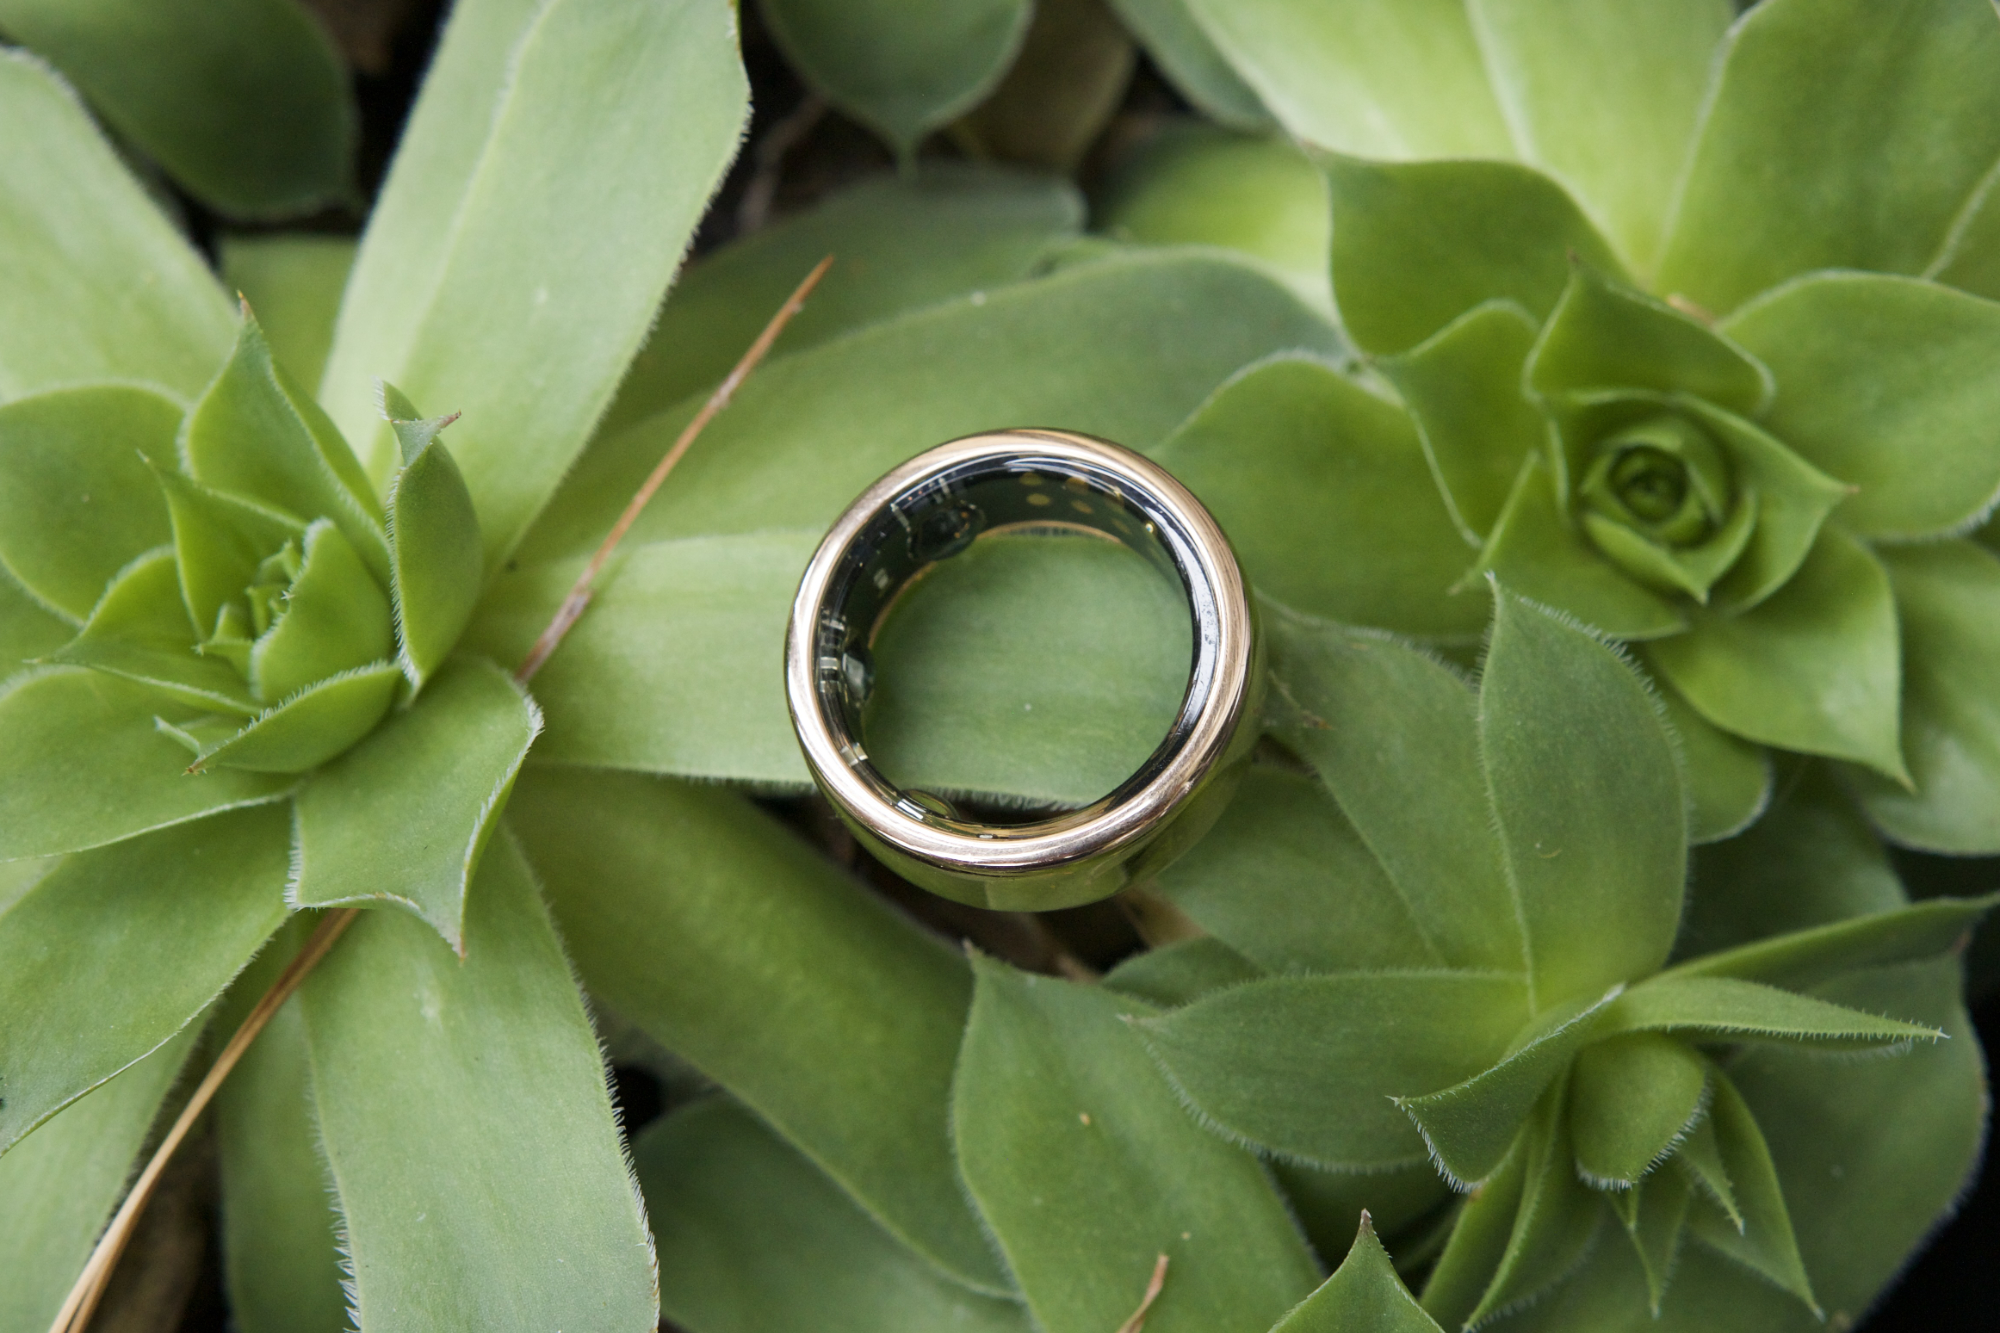 The Oura Ring Horizon resting on a green succulent plant.